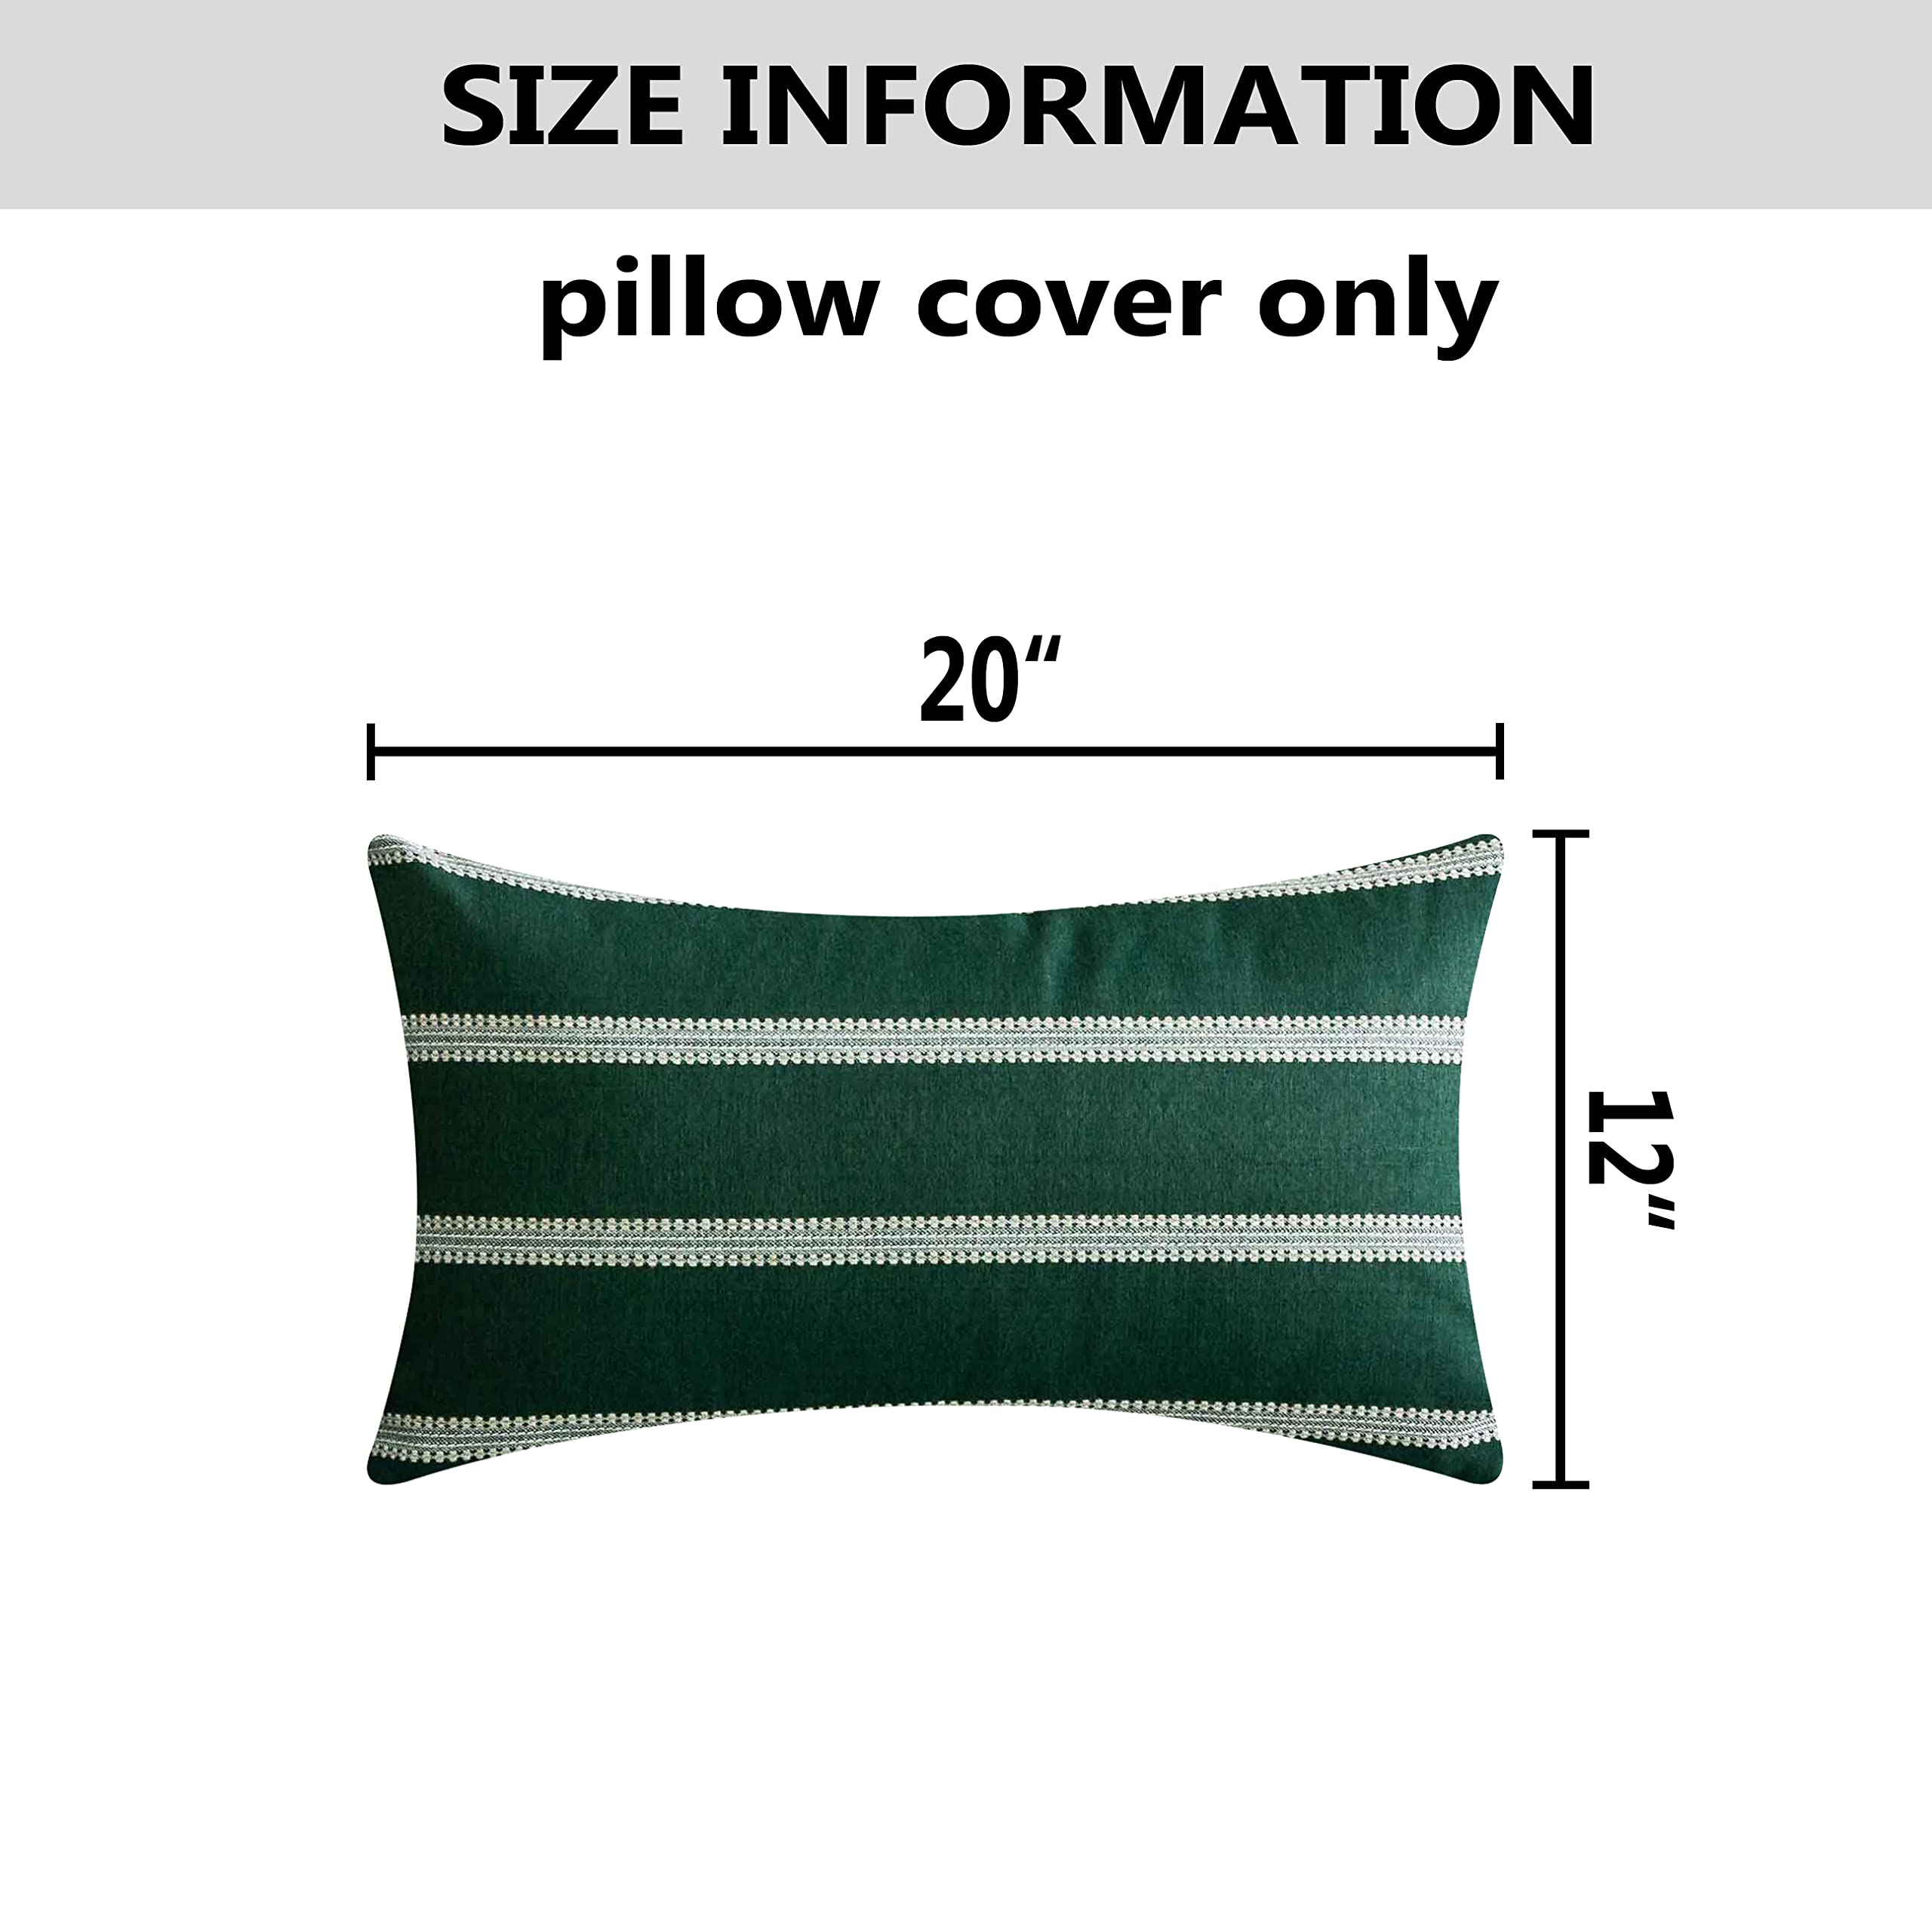 Home Brilliant Rectangular Throw Pillow Covers Striped Cotton Lumbar Accent Pillowcases for Couch Car Chair Women Holidays, 2 Pieces, 12x20 inches(30cm x 50cm), Green